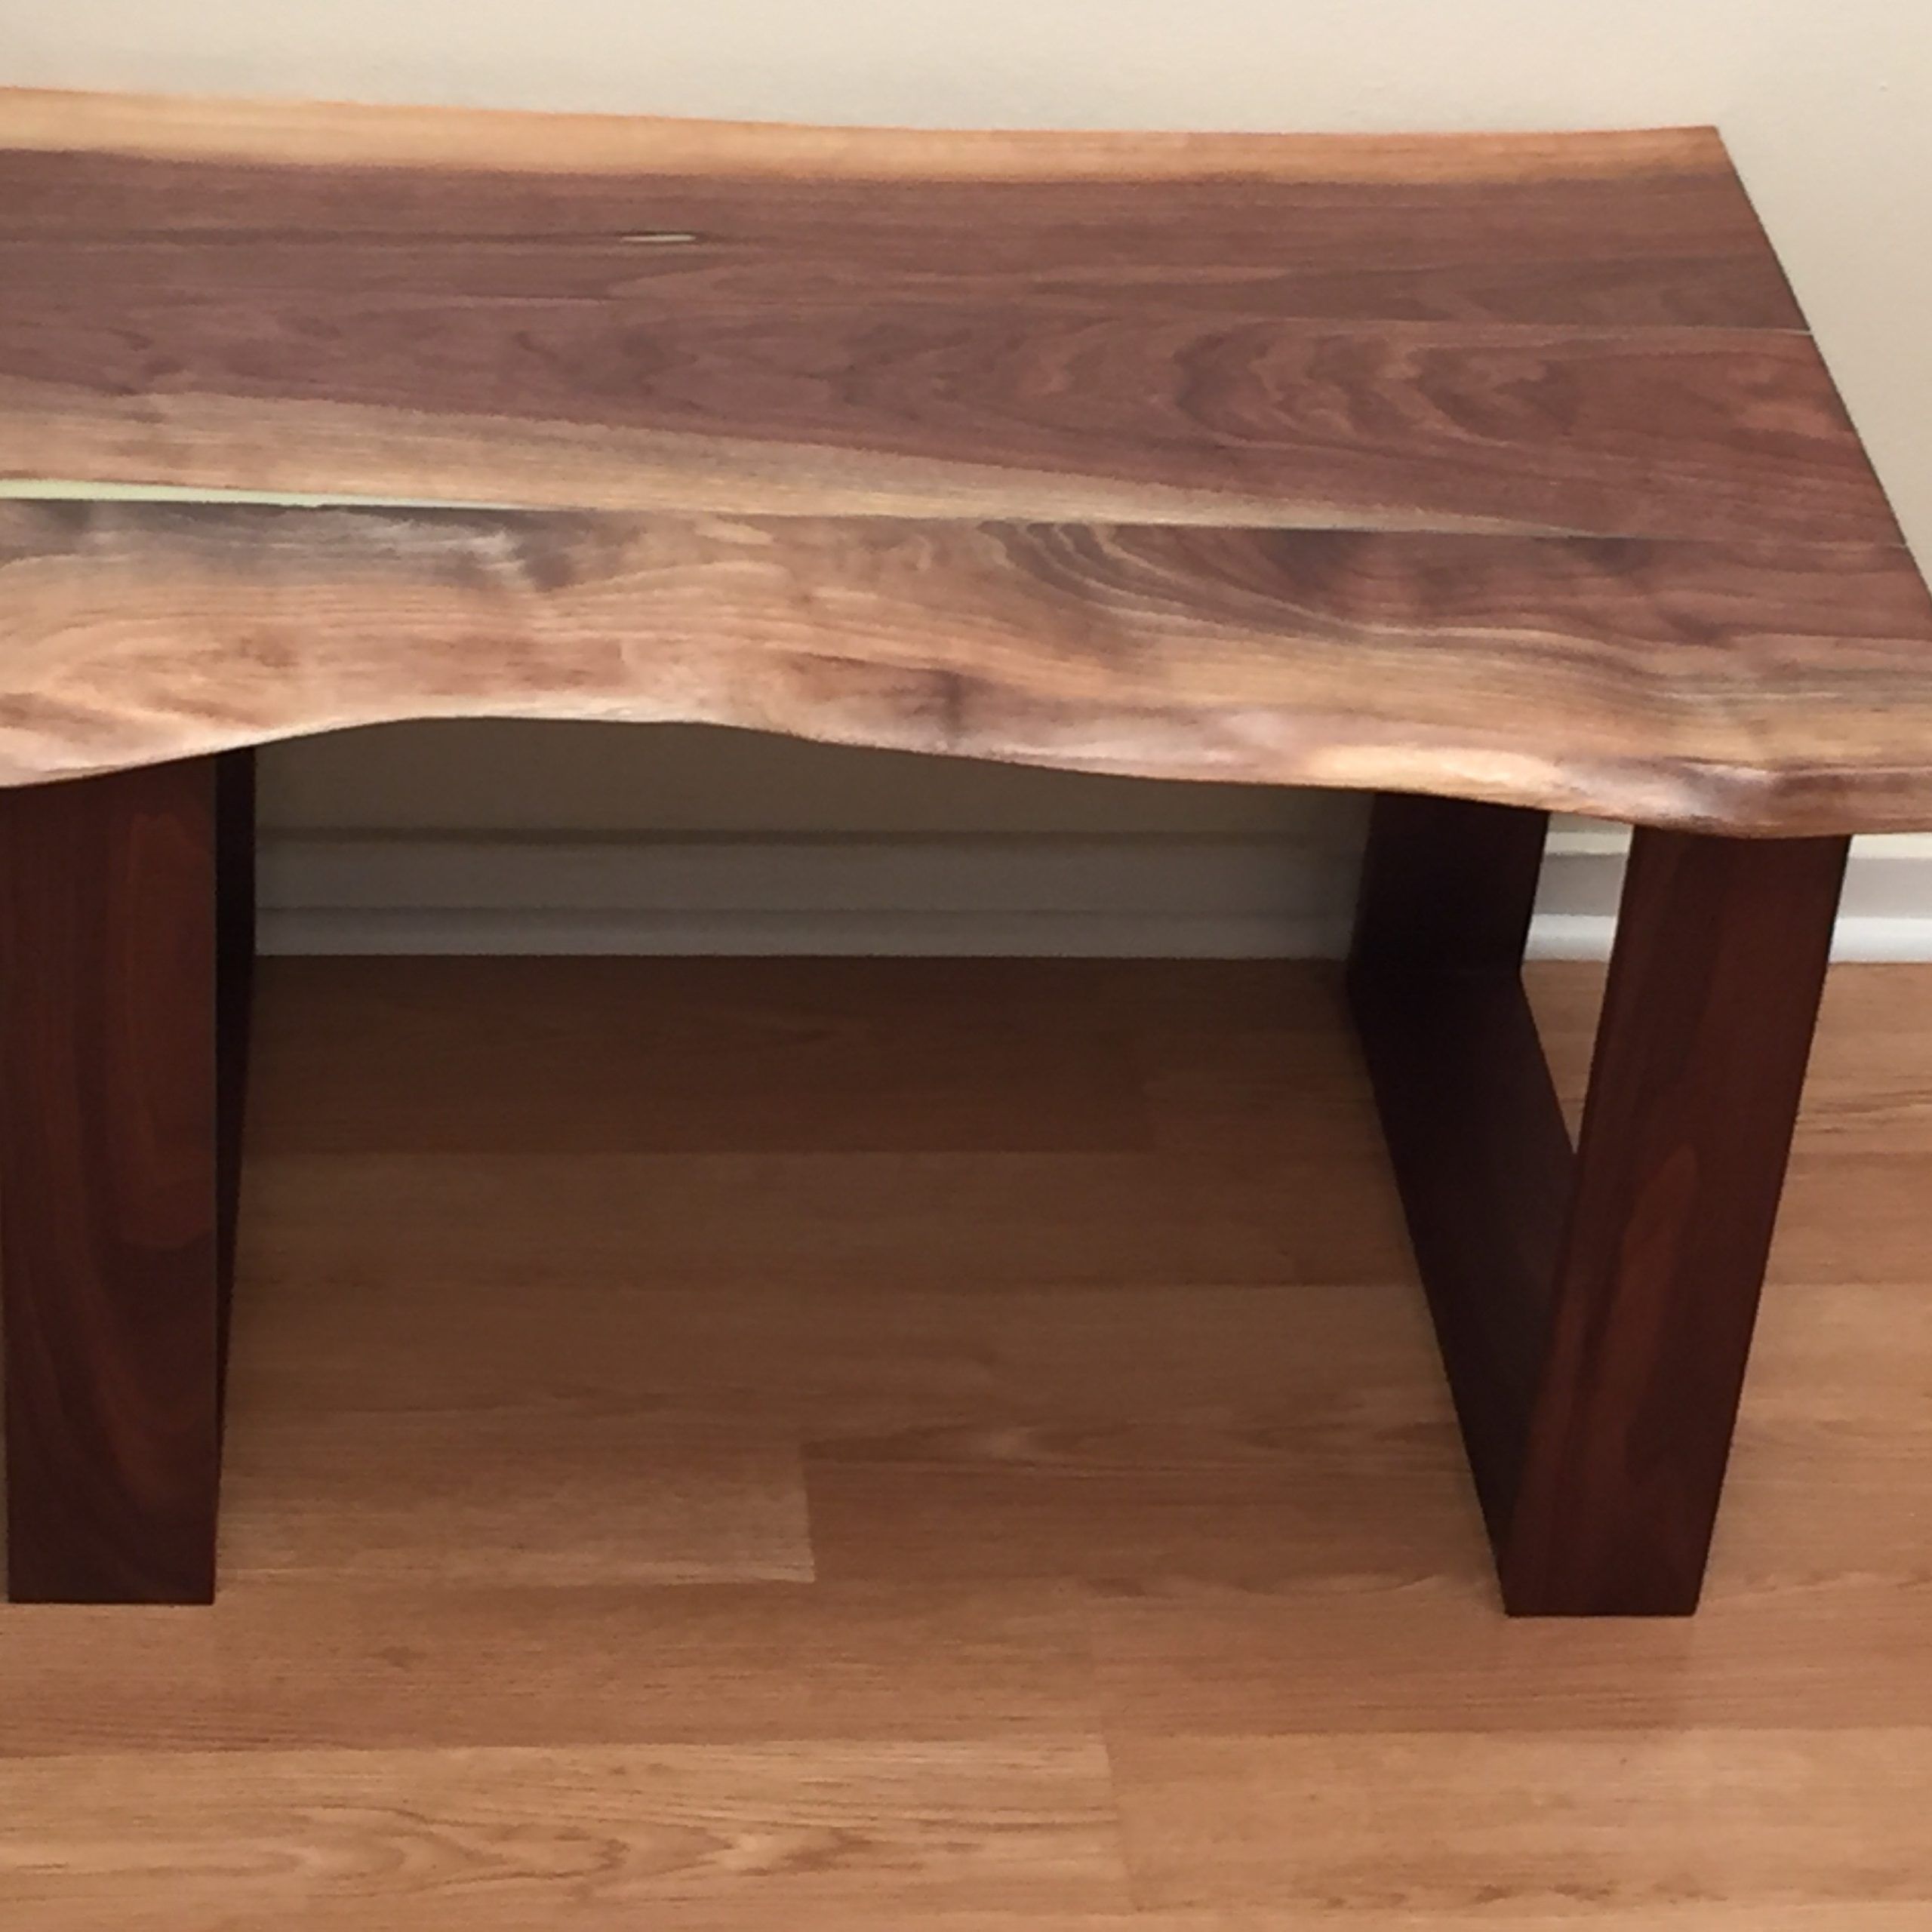 Cody Schweickhardt Walnut Coffee Table 4 6 With Regard To Coffee Tables For 4 6 People (Gallery 4 of 20)